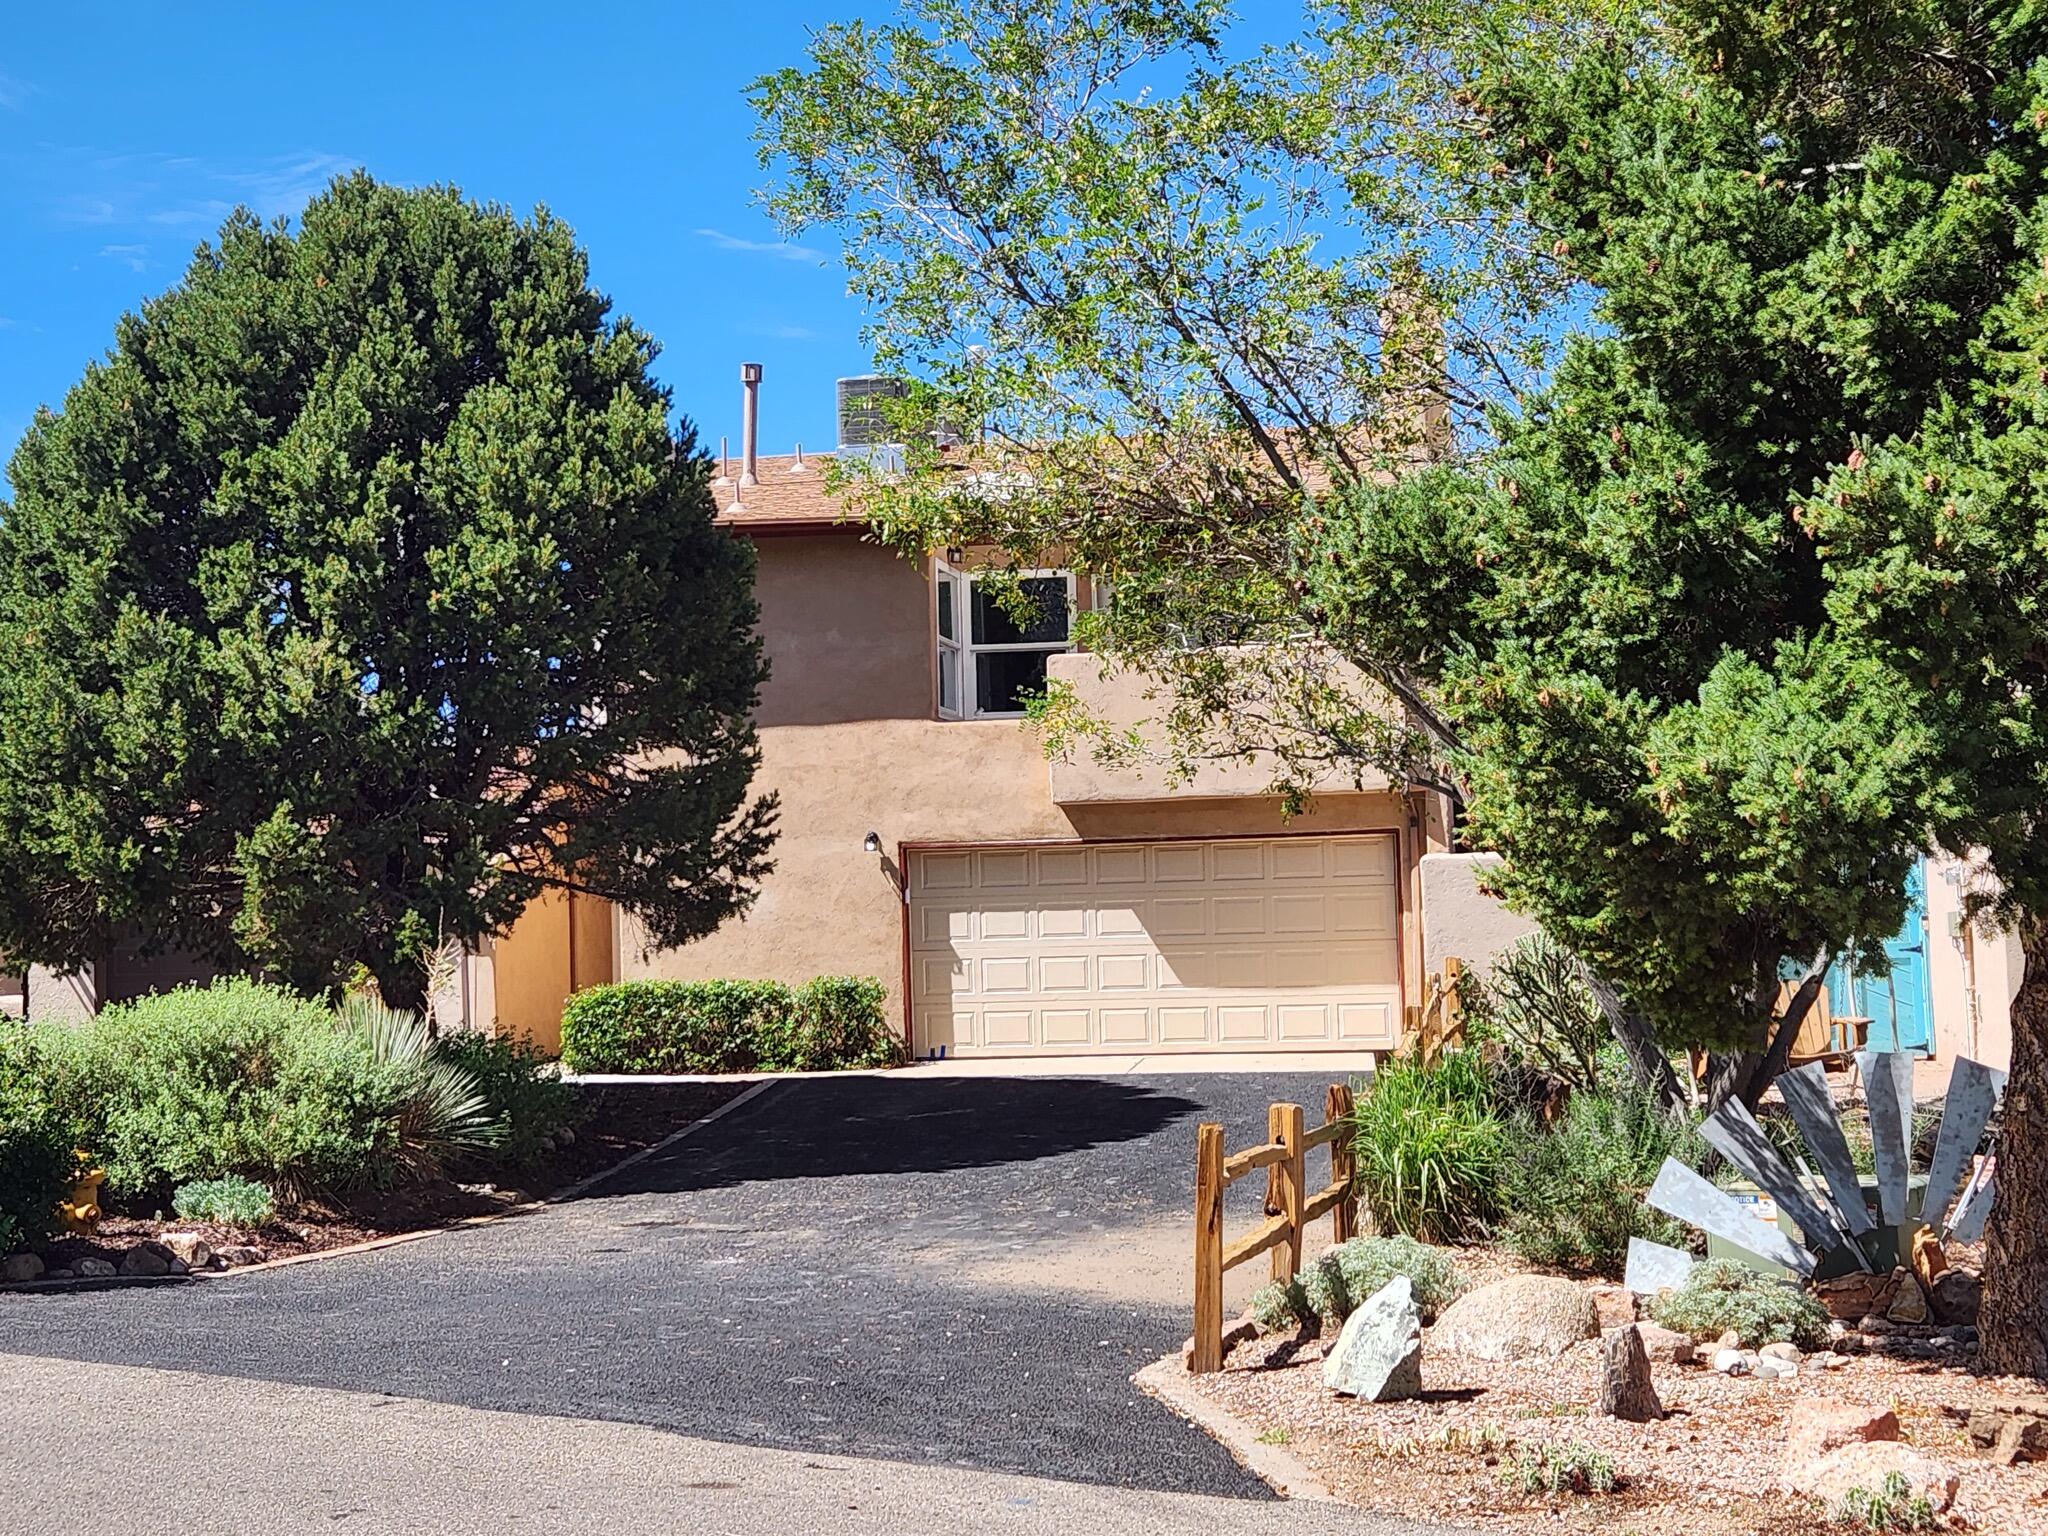 Live above the city in this renovated multi-story Townhome in Sandia Heights that invites New Mexico into your home. Enjoy sunsets and the adjacent park from a private balcony overlooking the city. The primary suite has it's own balcony facing the Sandia Mountains. New (2023) HVAC units, (2023) water heater, new (2023) appliances, new (2023) windows, and new (2023) flooring. The kitchen is completely remodeled with stainless (Samsung) appliances. Kiva fireplaces in the primary bedroom and living room will make your evenings warm in the winter. Two living areas on different levels, one with a balcony and the other with your own private flagstone patio.